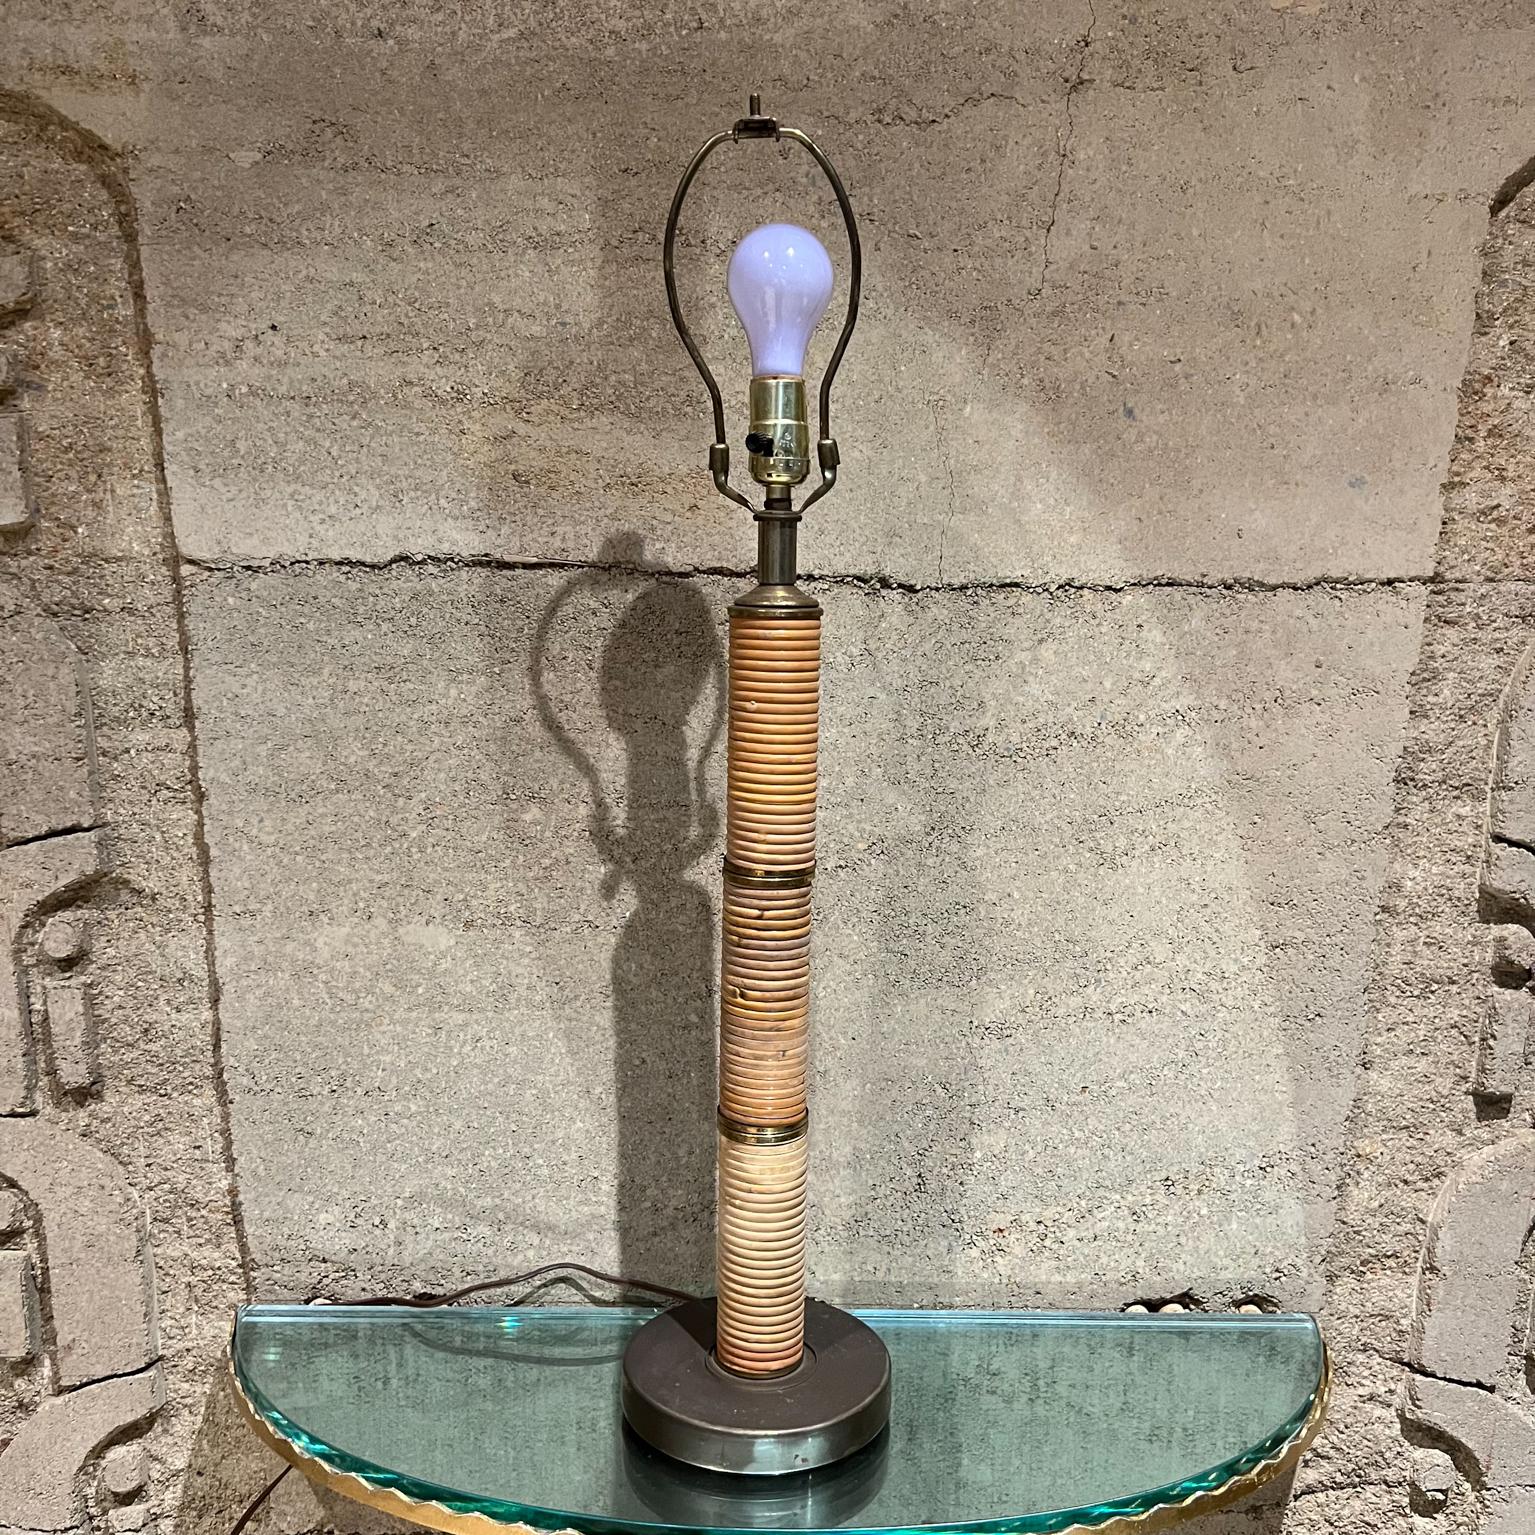 Vintage Wrapped Cane and Brass plated Table Lamp.
24.25 to socket x 7 diameter
No lamp shade is included. 
Preowned original vintage unrestored condition
See all images provided.
